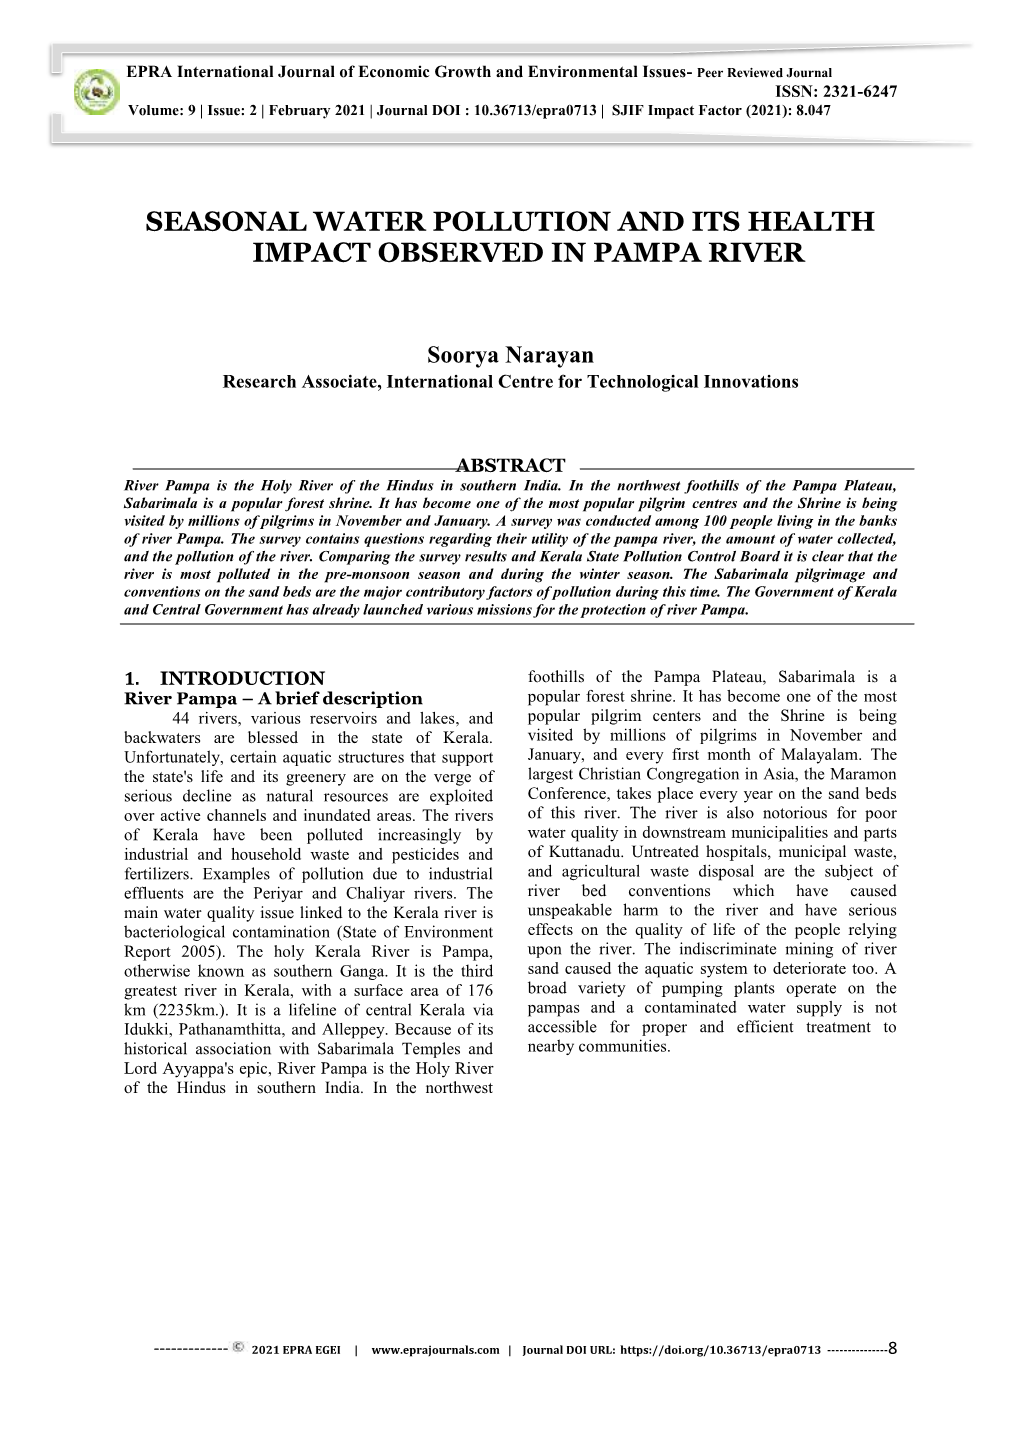 Seasonal Water Pollution and Its Health Impact Observed in Pampa River